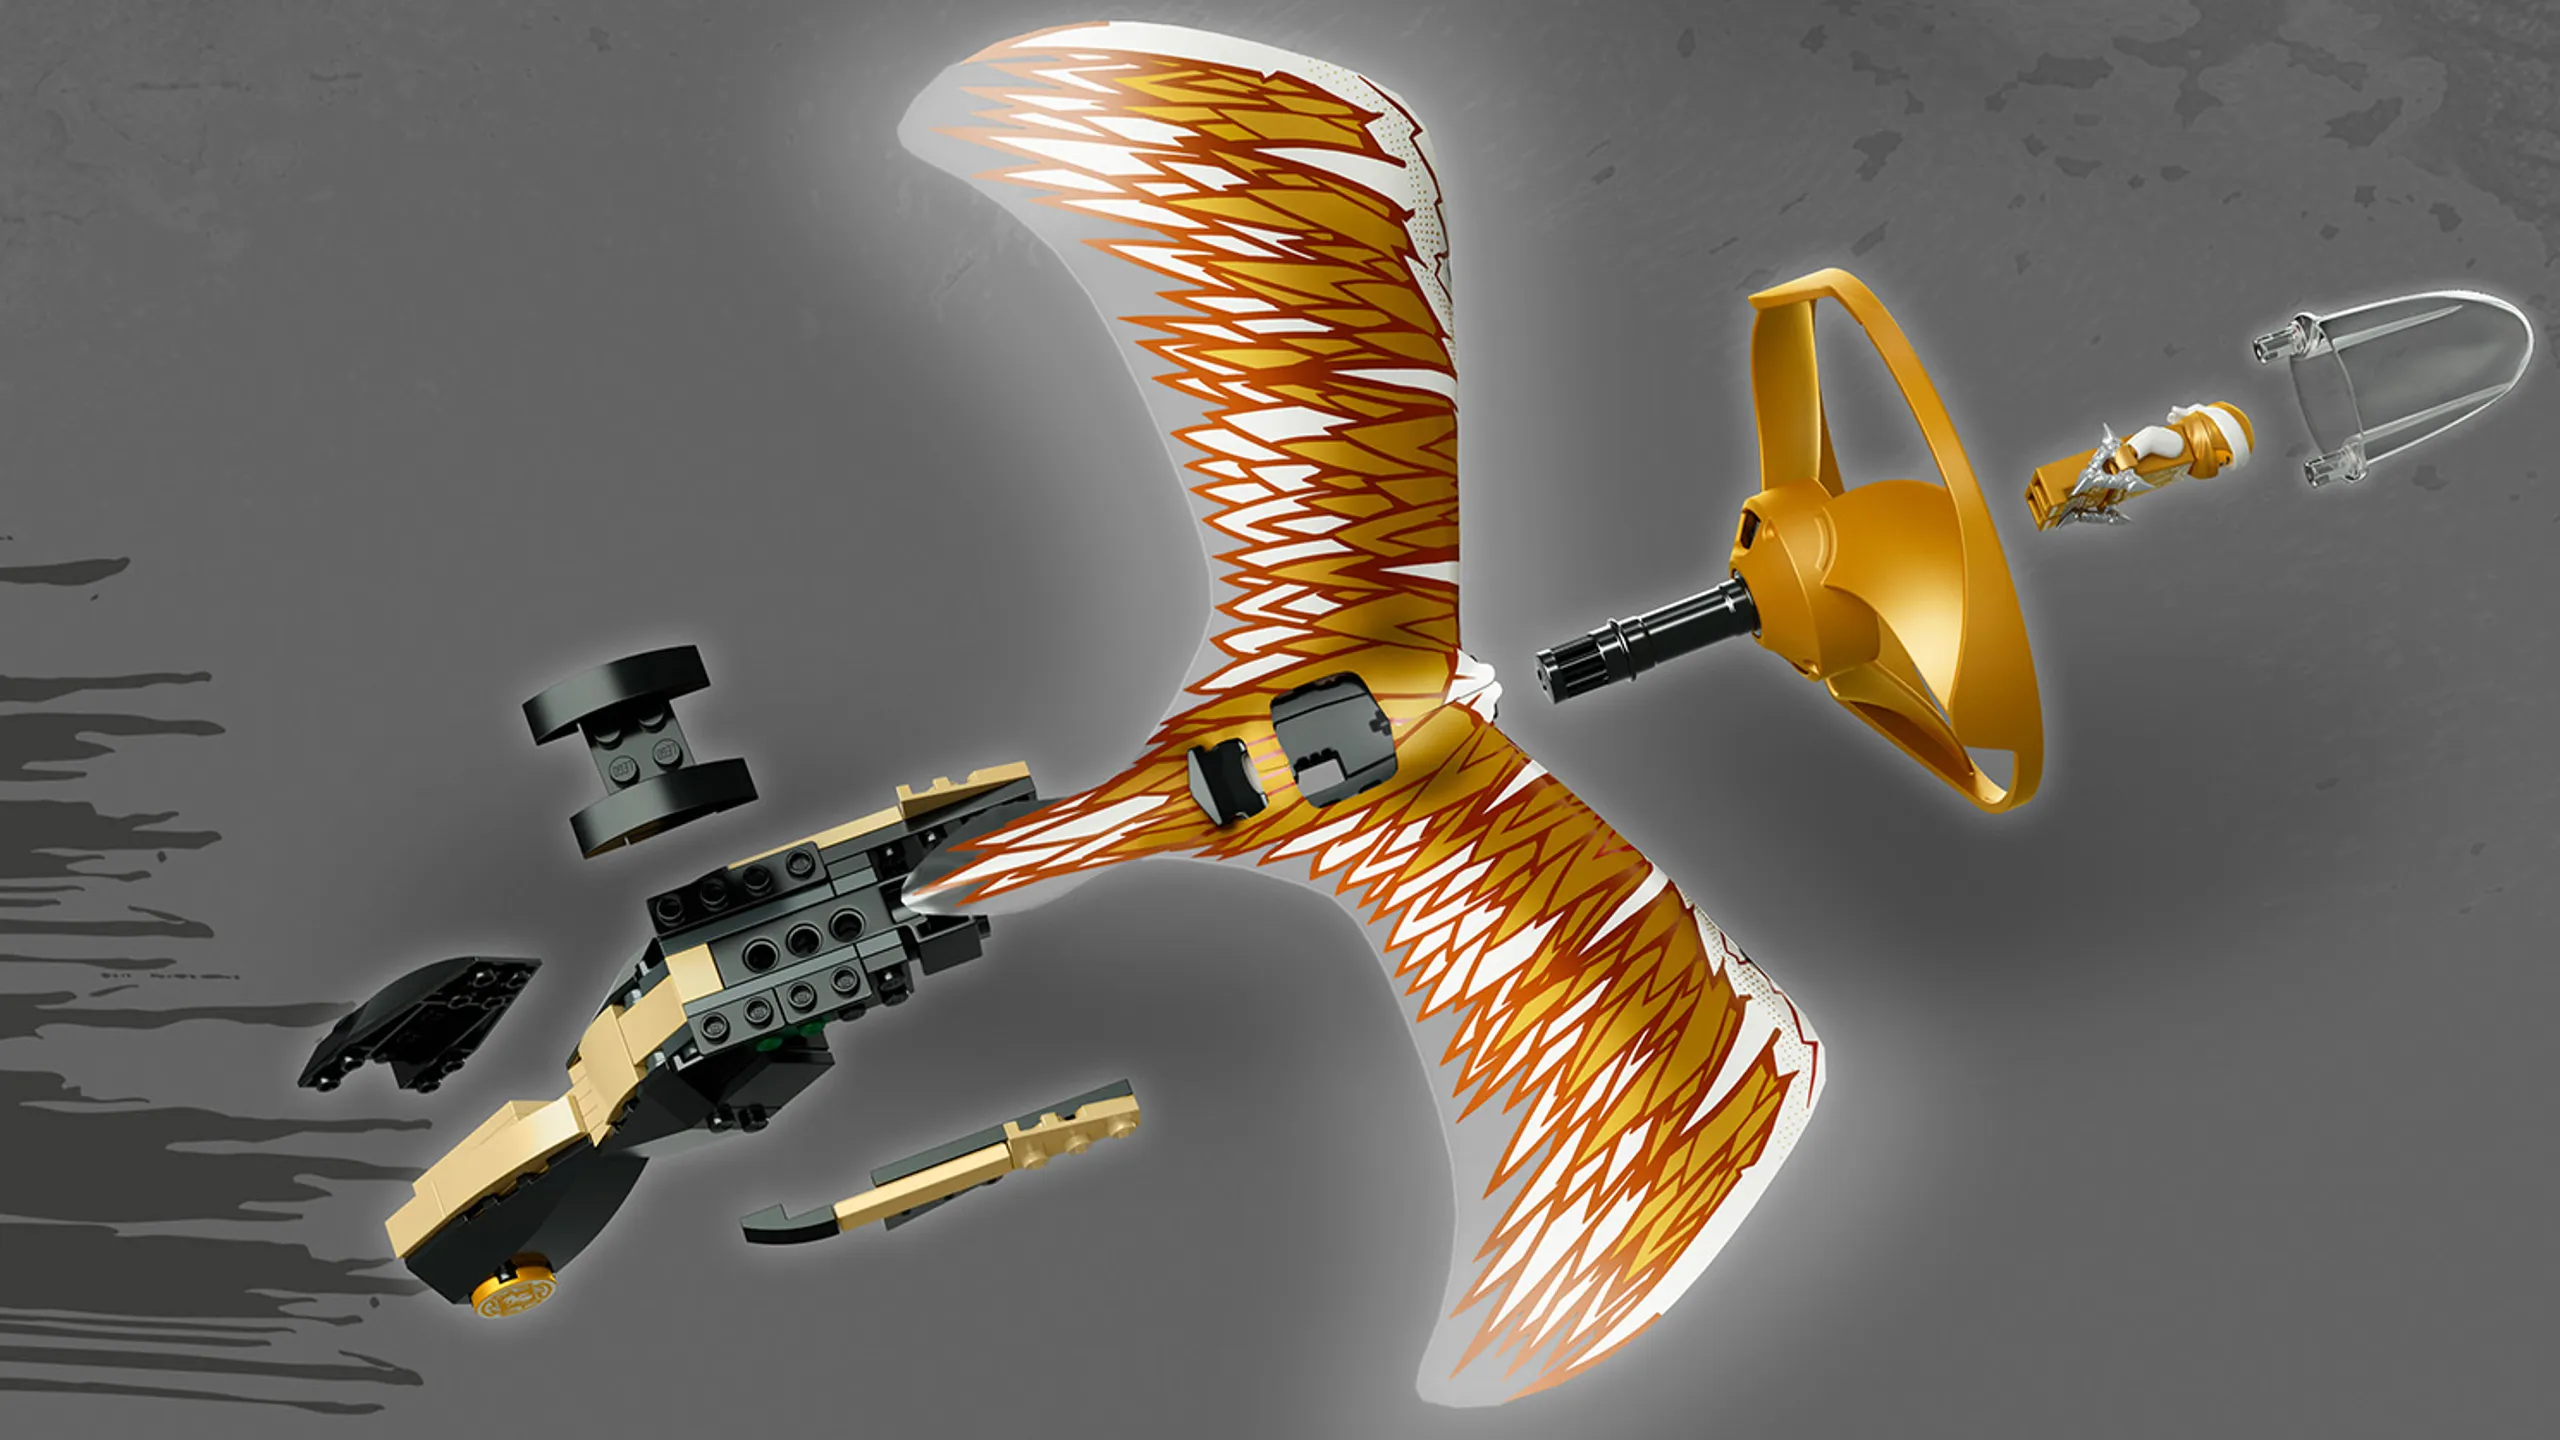 LEGO Ninjago - 70644 Golden Dragon Master - The spinjitzu is easy to assemble and consists of a handle, some ornamental dragons wings and a propeller circle.